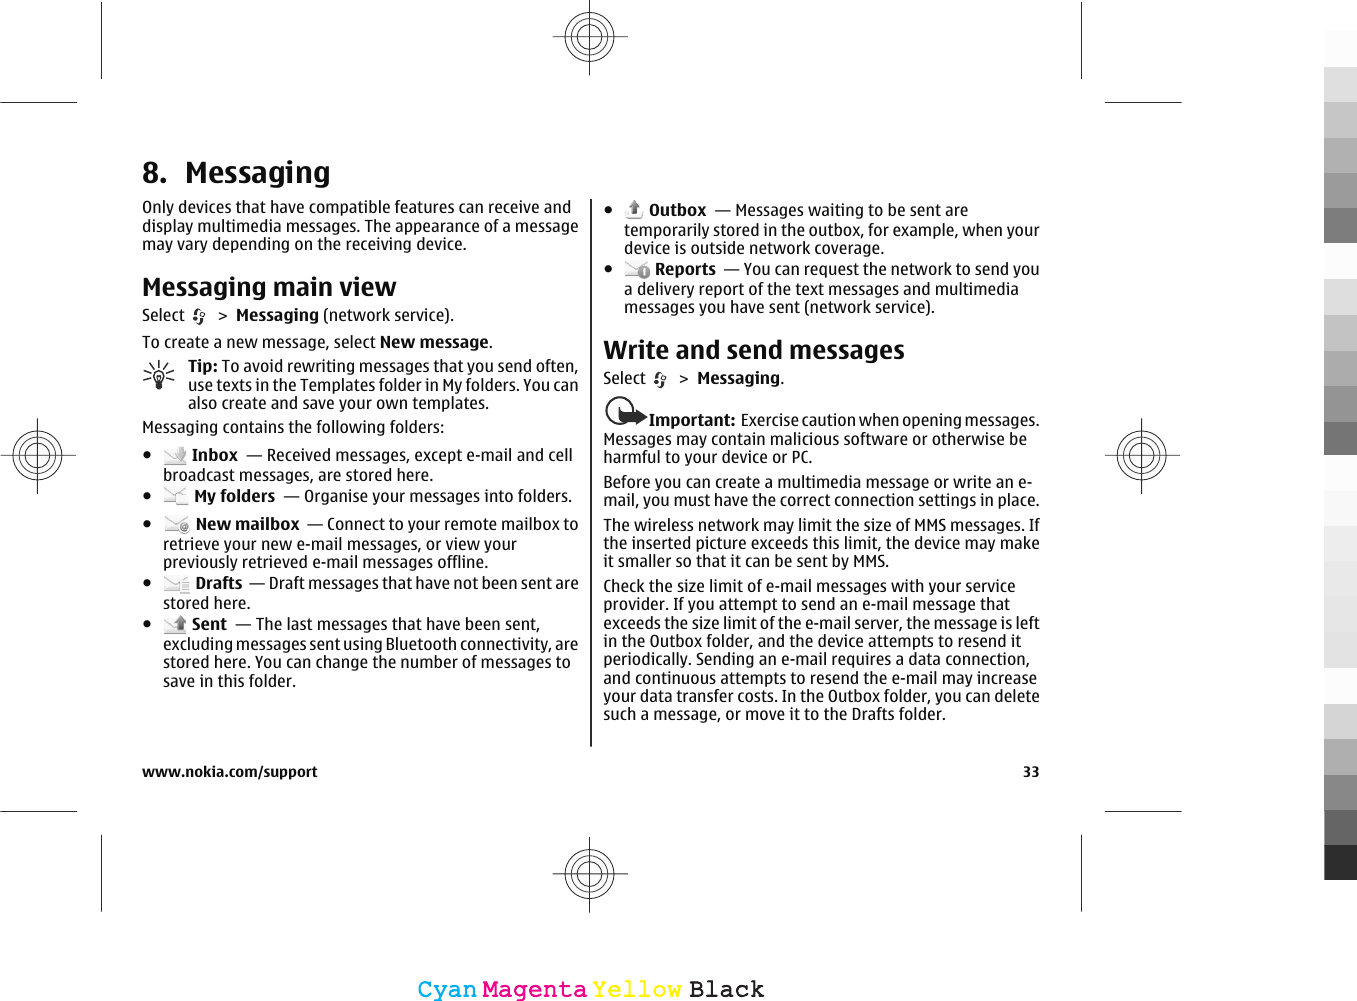 8. MessagingOnly devices that have compatible features can receive anddisplay multimedia messages. The appearance of a messagemay vary depending on the receiving device.Messaging main viewSelect   &gt; Messaging (network service).To create a new message, select New message.Tip: To avoid rewriting messages that you send often,use texts in the Templates folder in My folders. You canalso create and save your own templates.Messaging contains the following folders:● Inbox  — Received messages, except e-mail and cellbroadcast messages, are stored here.● My folders  — Organise your messages into folders.● New mailbox  — Connect to your remote mailbox toretrieve your new e-mail messages, or view yourpreviously retrieved e-mail messages offline.● Drafts  — Draft messages that have not been sent arestored here.● Sent  — The last messages that have been sent,excluding messages sent using Bluetooth connectivity, arestored here. You can change the number of messages tosave in this folder.● Outbox  — Messages waiting to be sent aretemporarily stored in the outbox, for example, when yourdevice is outside network coverage.● Reports  — You can request the network to send youa delivery report of the text messages and multimediamessages you have sent (network service).Write and send messagesSelect   &gt; Messaging.Important:  Exercise caution when opening messages.Messages may contain malicious software or otherwise beharmful to your device or PC.Before you can create a multimedia message or write an e-mail, you must have the correct connection settings in place.The wireless network may limit the size of MMS messages. Ifthe inserted picture exceeds this limit, the device may makeit smaller so that it can be sent by MMS.Check the size limit of e-mail messages with your serviceprovider. If you attempt to send an e-mail message thatexceeds the size limit of the e-mail server, the message is leftin the Outbox folder, and the device attempts to resend itperiodically. Sending an e-mail requires a data connection,and continuous attempts to resend the e-mail may increaseyour data transfer costs. In the Outbox folder, you can deletesuch a message, or move it to the Drafts folder.www.nokia.com/support 33CyanCyanMagentaMagentaYellowYellowBlackBlack